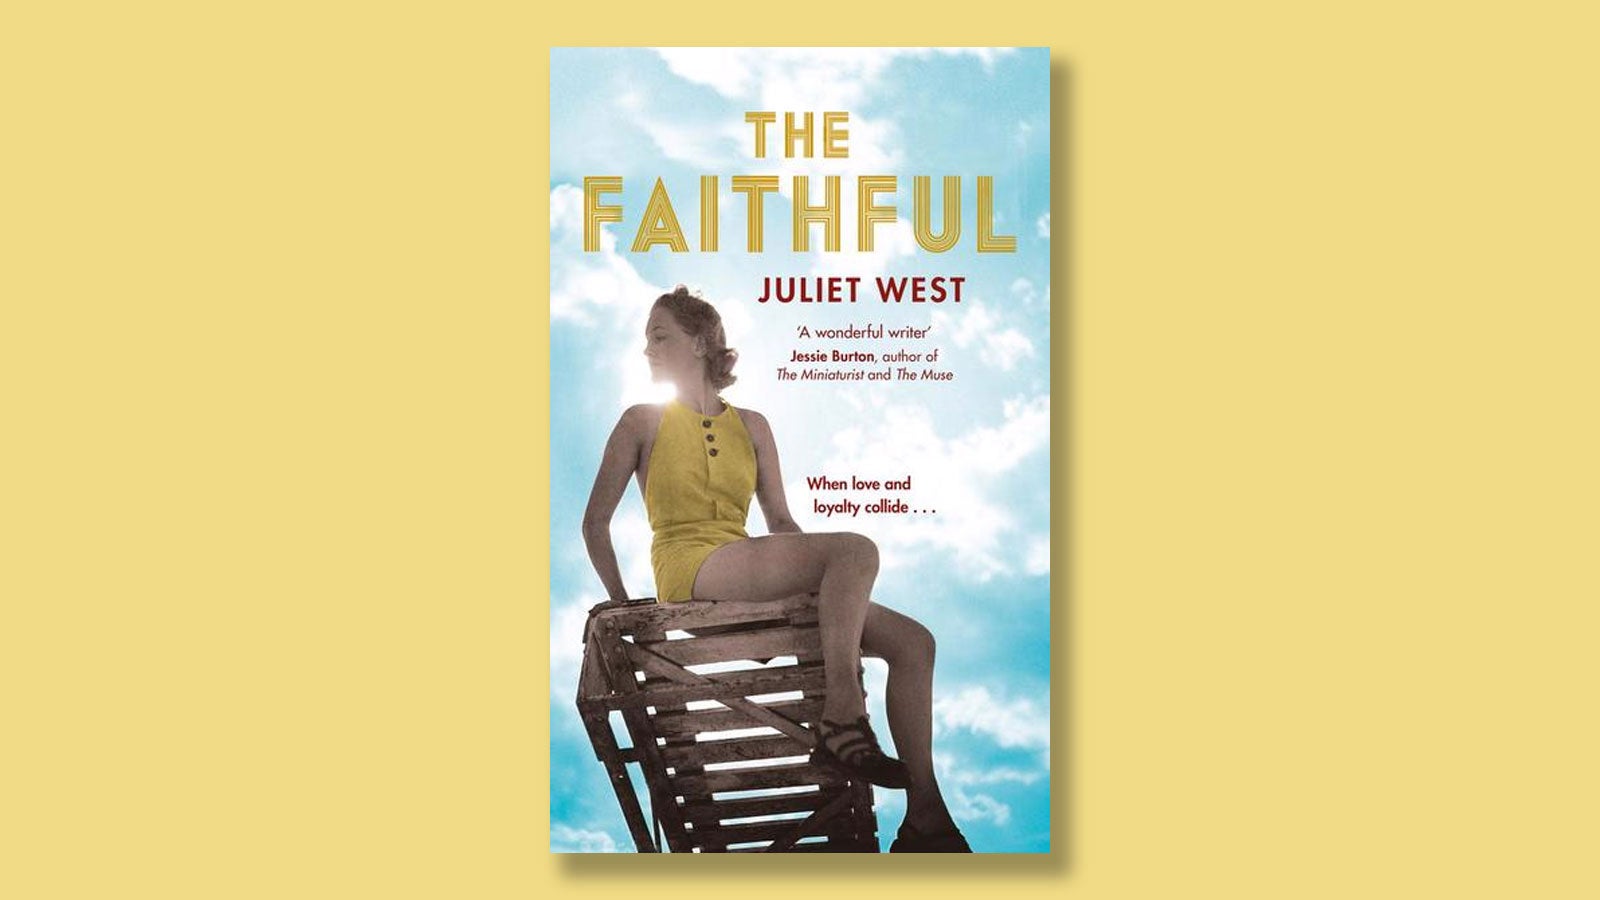 Juliet West's The Faithful book jacket on a yellow background.